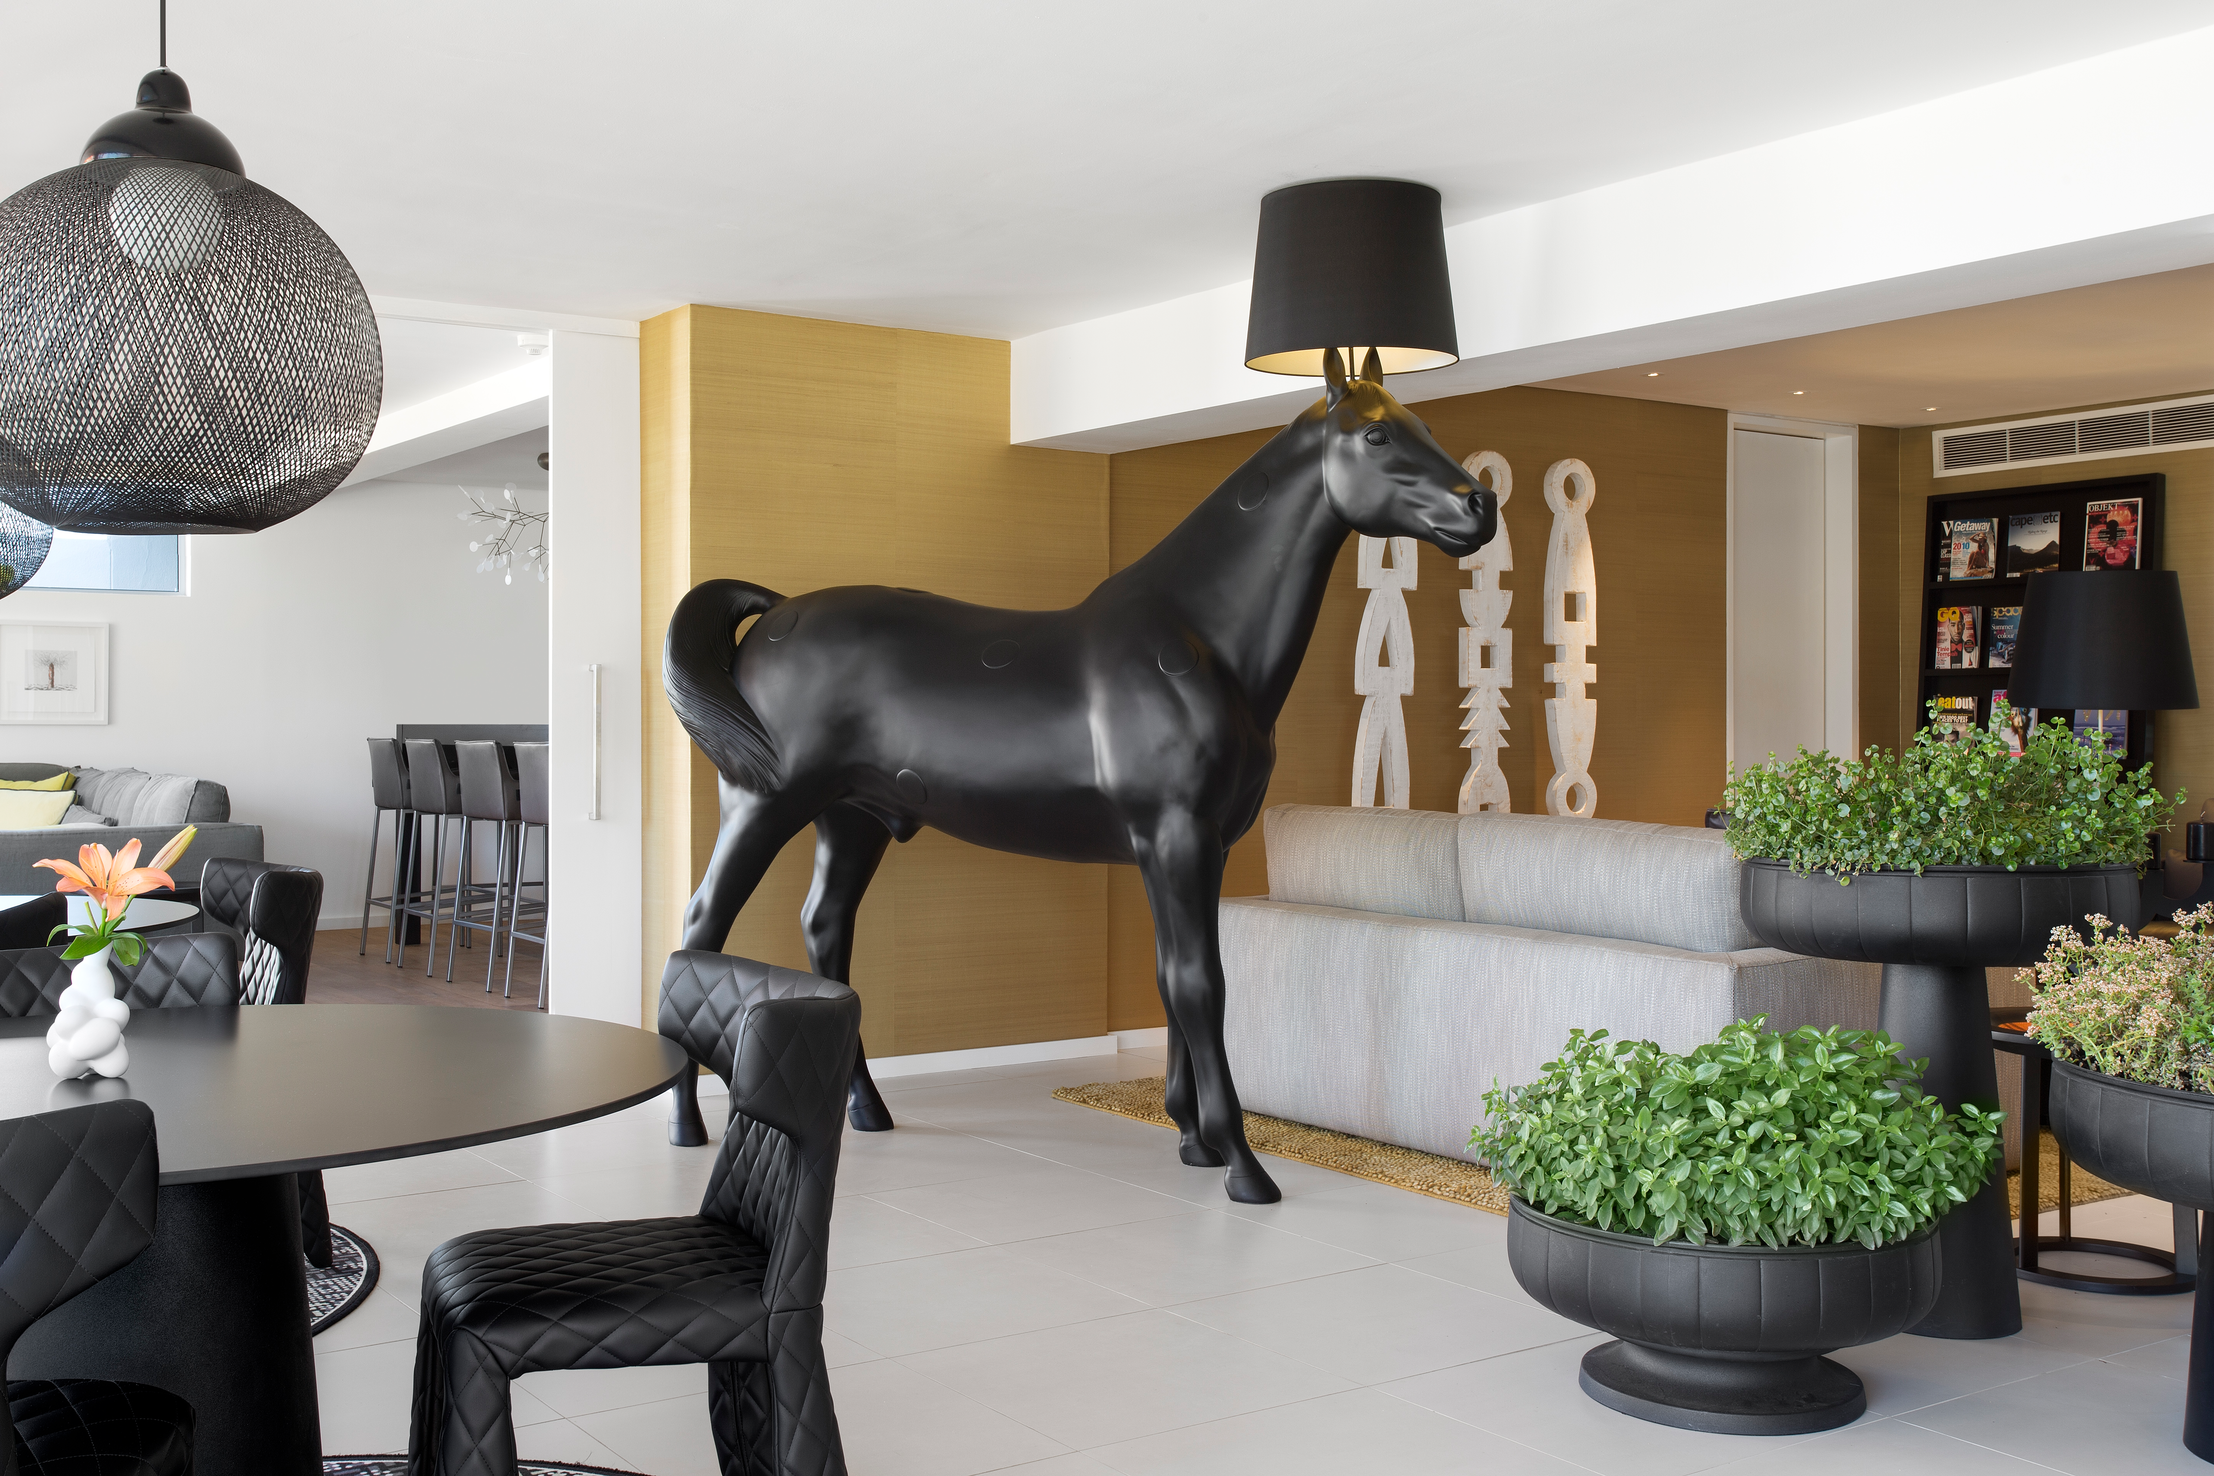 Interior of ZA Clouds with Horse Floor Lamp, Non Random suspension light and Monster Dining Chair